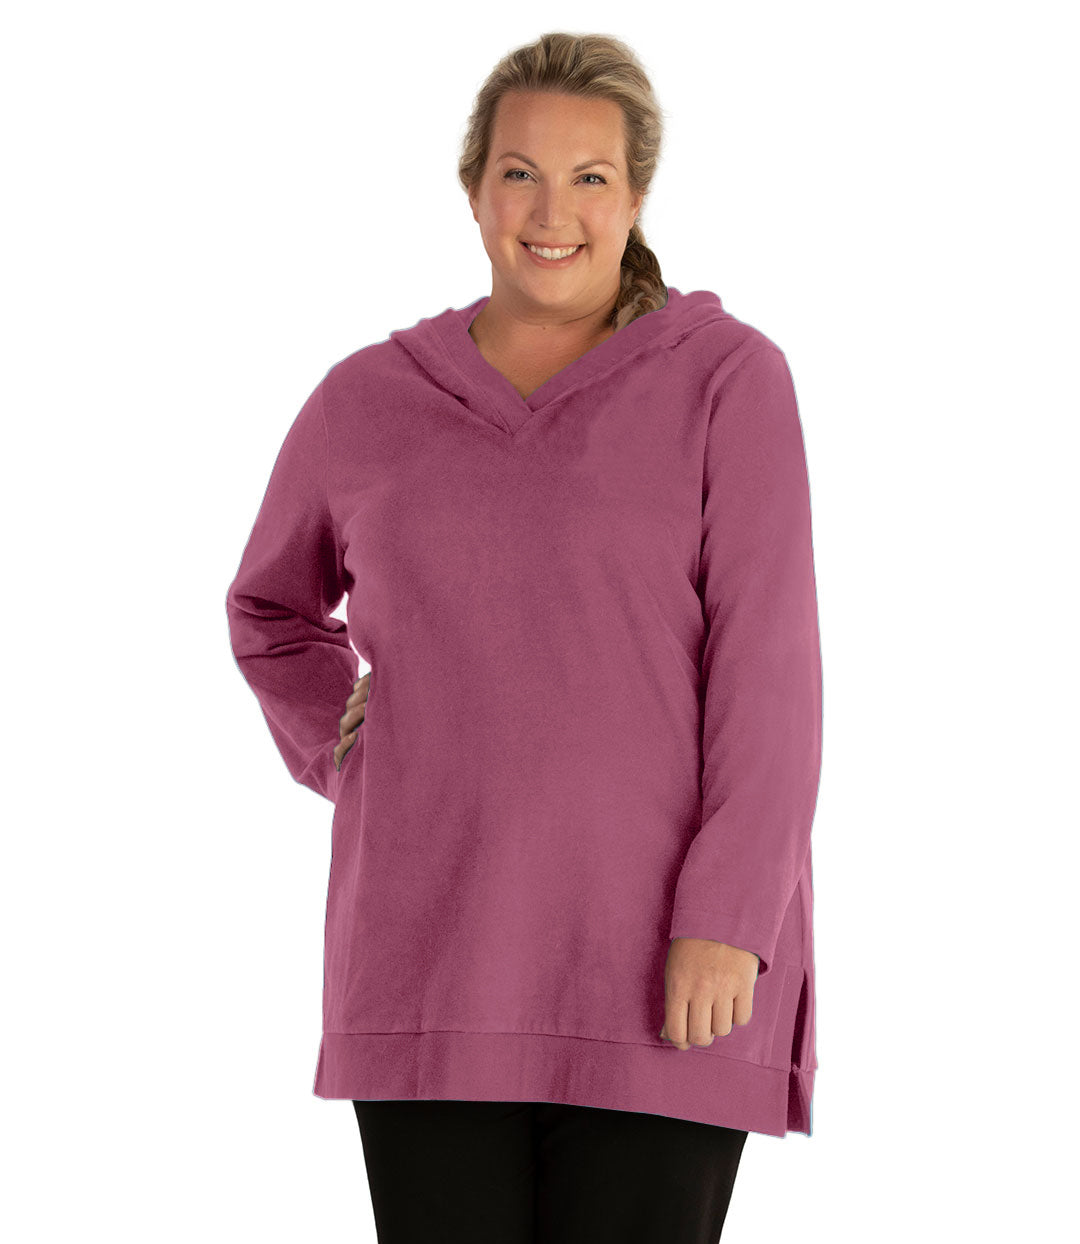 Plus size woman, facing front, wearing JunoActive plus size Legacy Cotton Casual Pullover V-Neck Hoodie in the color Dusty Rose. She is wearing JunoActive Plus Size Leggings in the color Black.